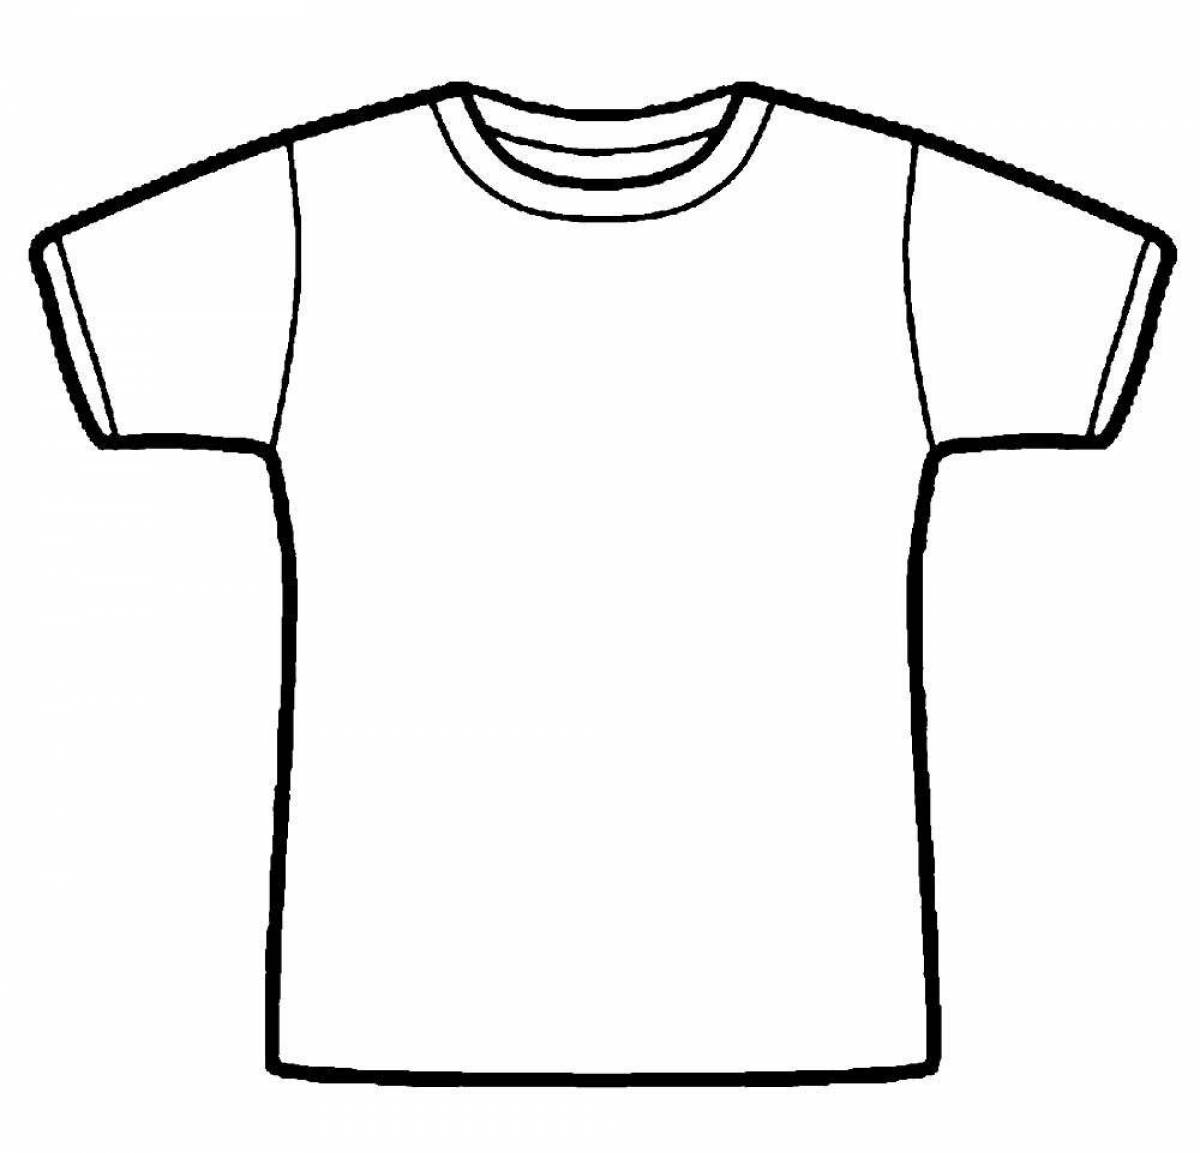 Coloring with a large t-shirt